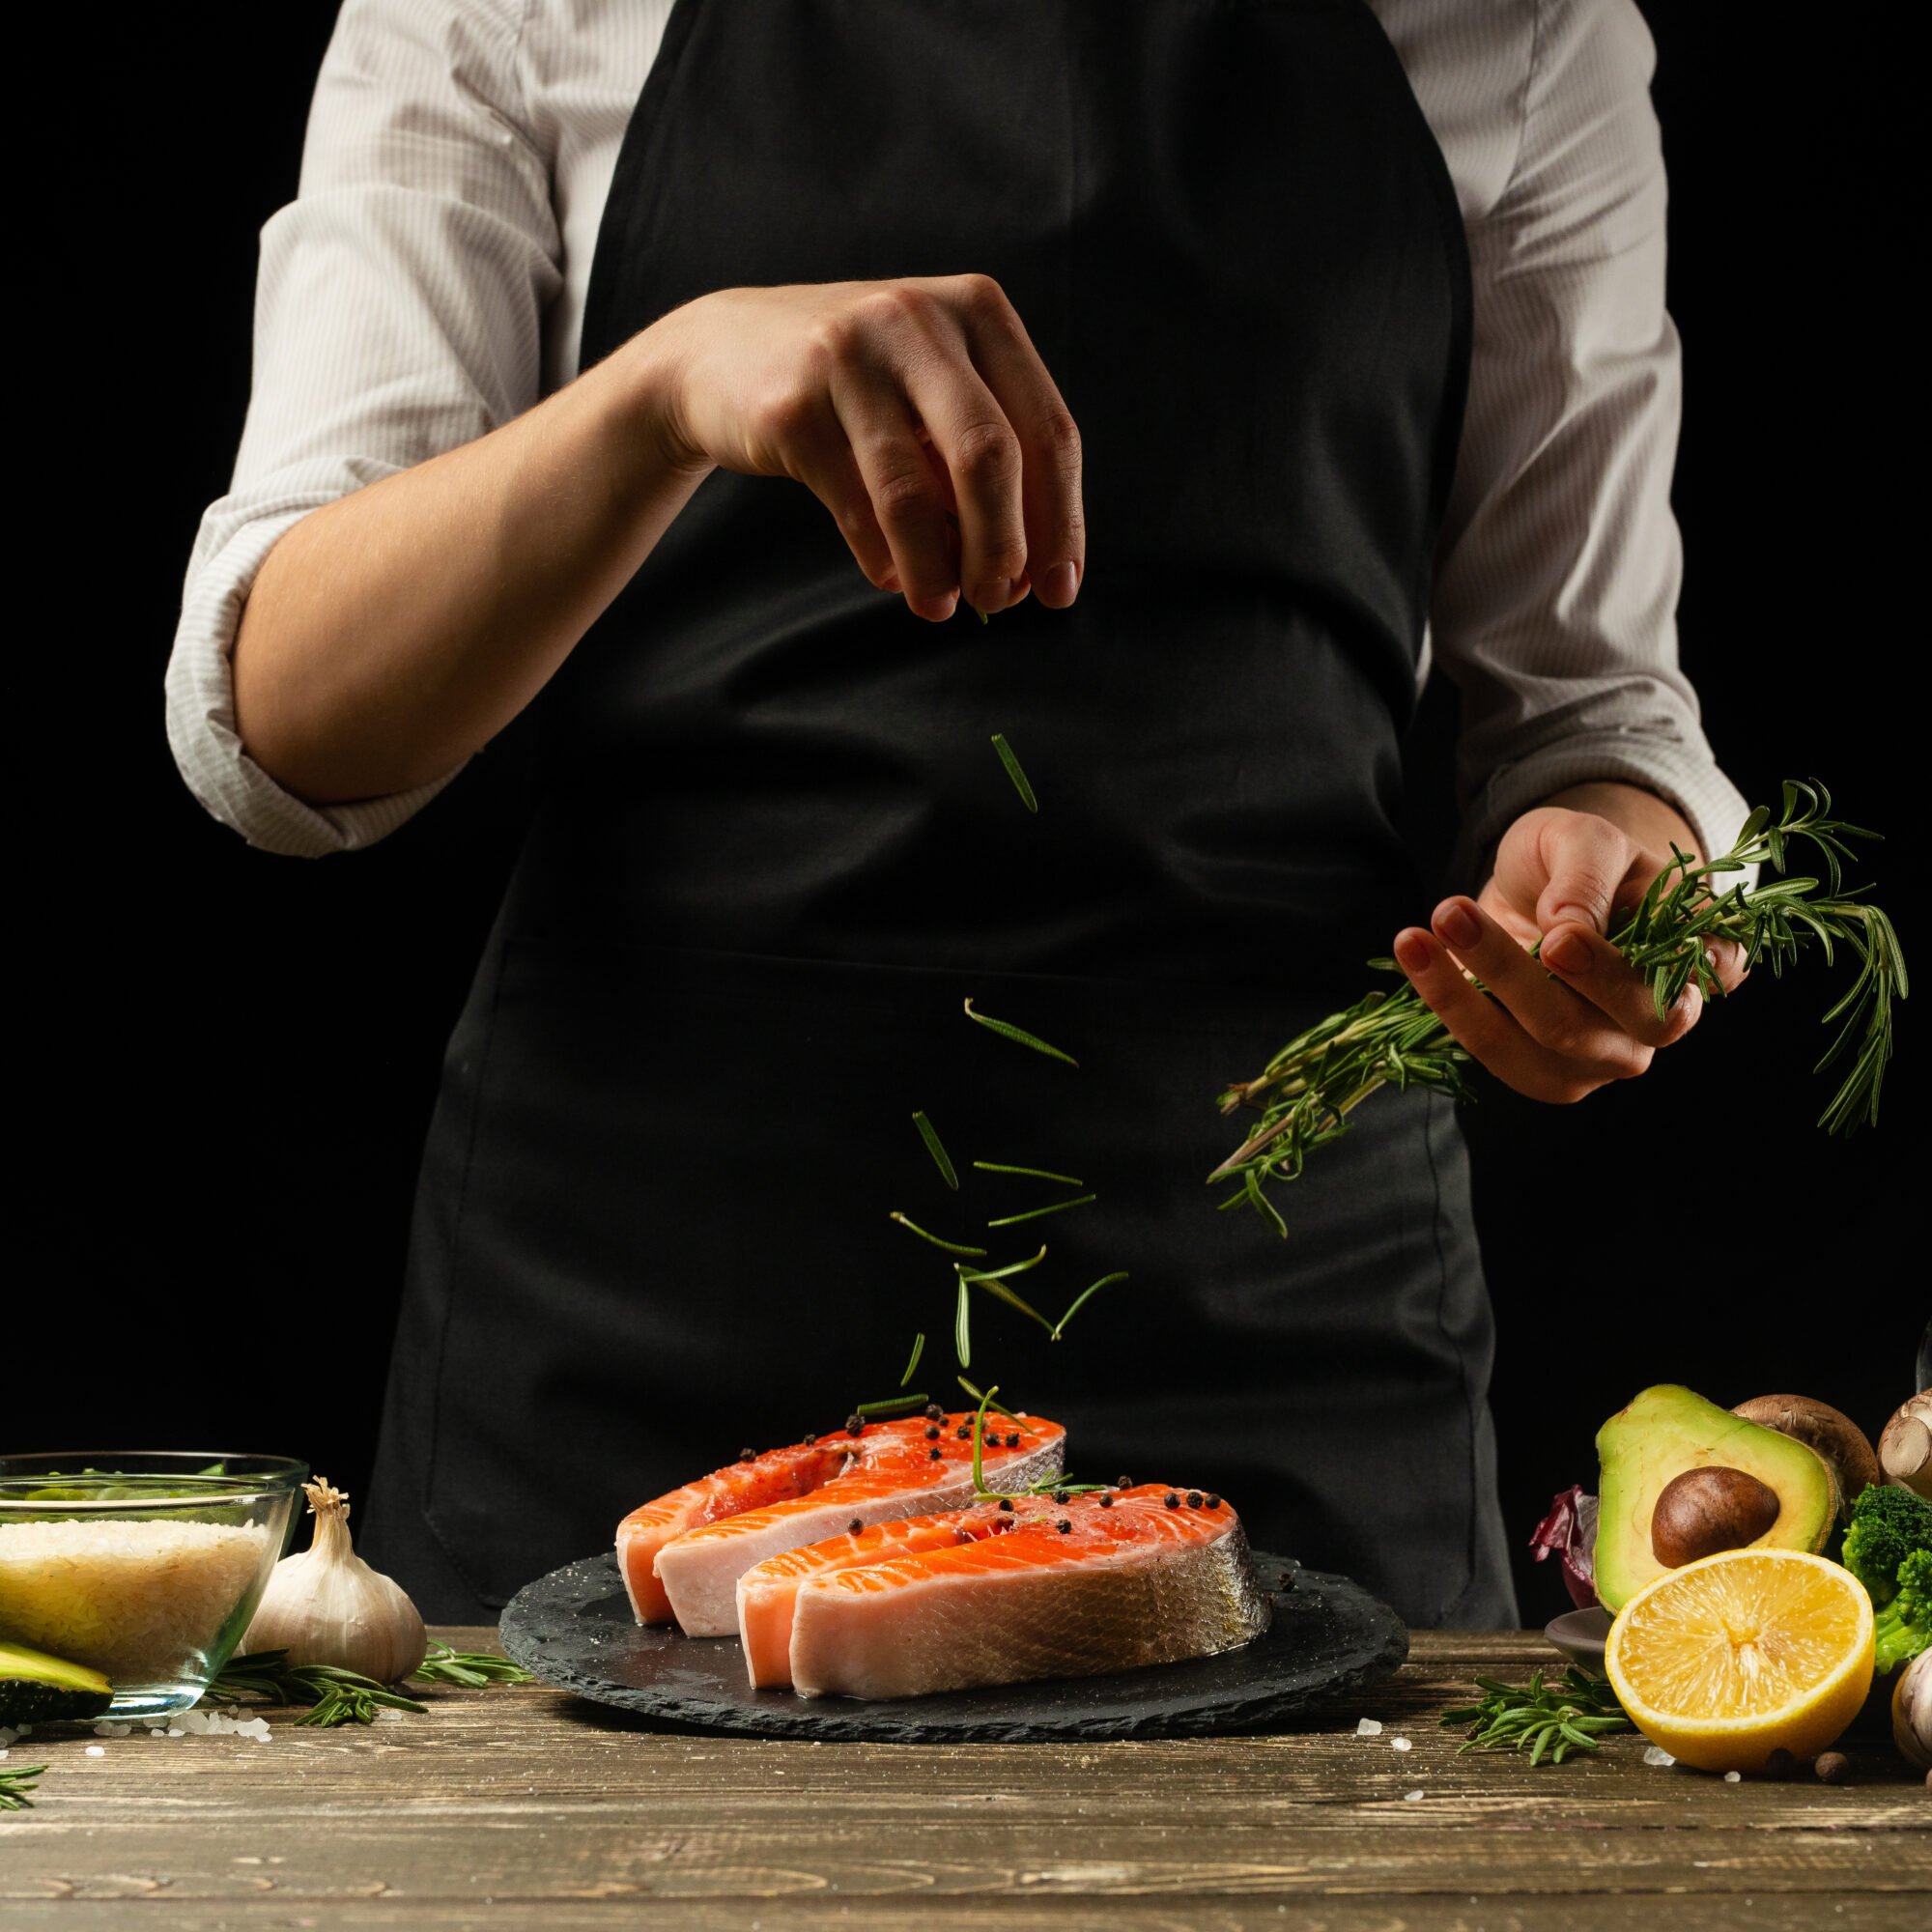 The chef prepares fresh salmon fish, freshly salted trout, sprinkled with rosemary leaves with ingredients. Salmon steak, restaurants, hotel business, menu and recipe book